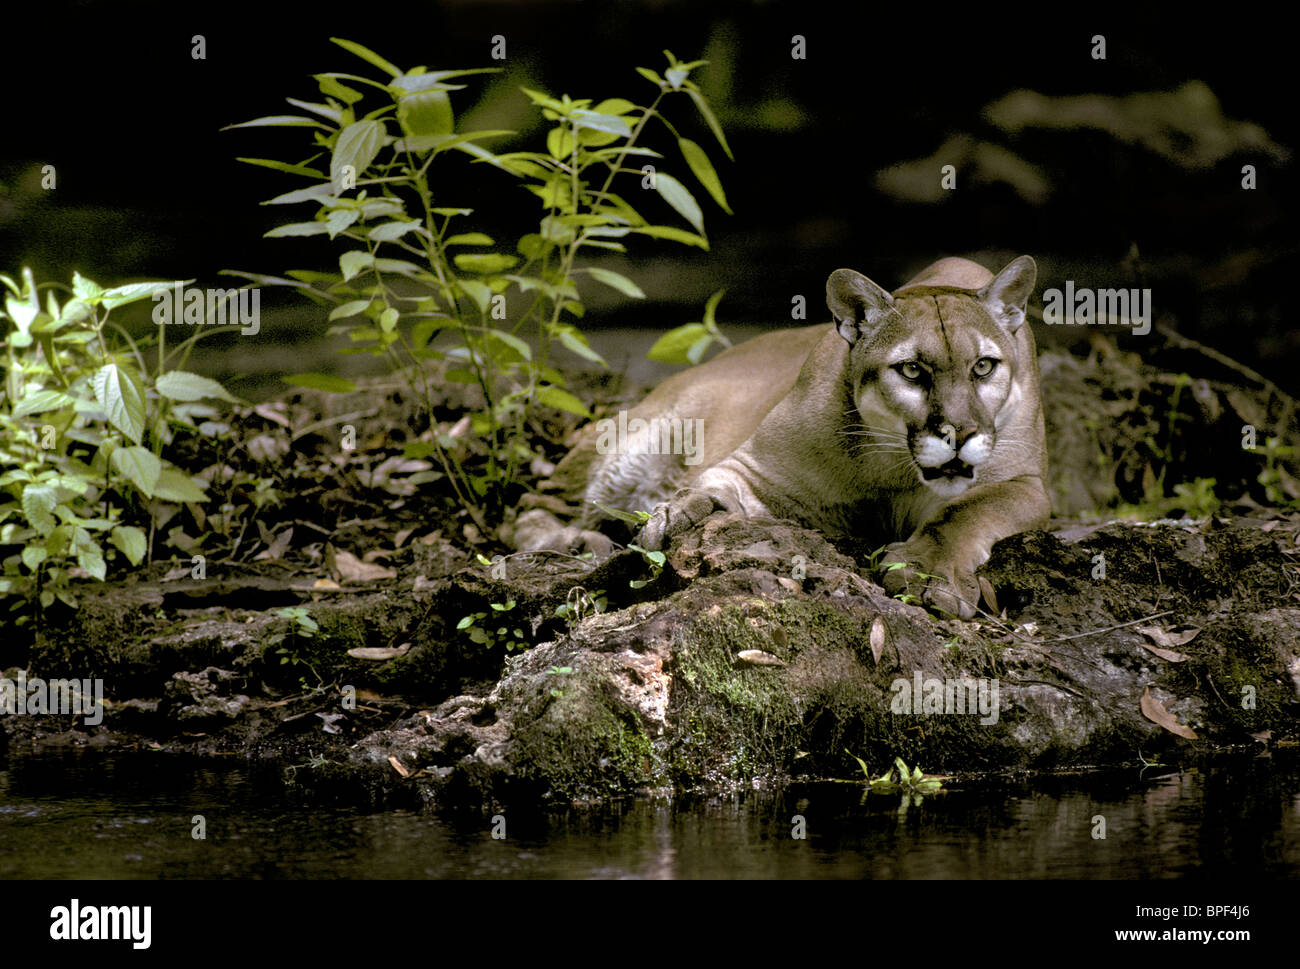 Florida panther, Felis concolor coryi, controlled, endangered specie, Stock Photo